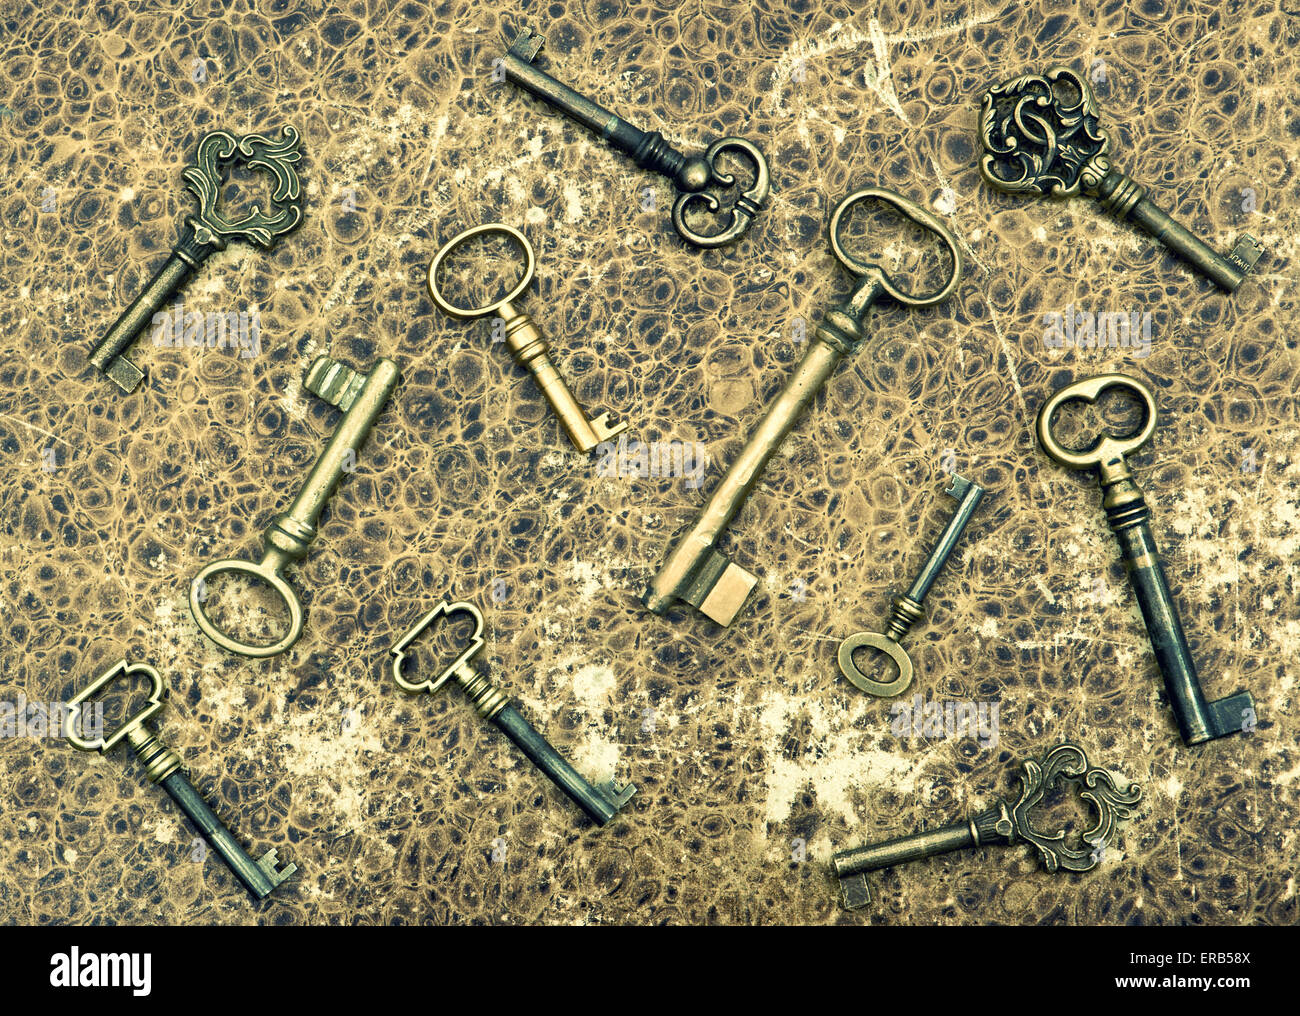 Old golden keys over vintage paper background in animal leather design. Retro style toned picture Stock Photo